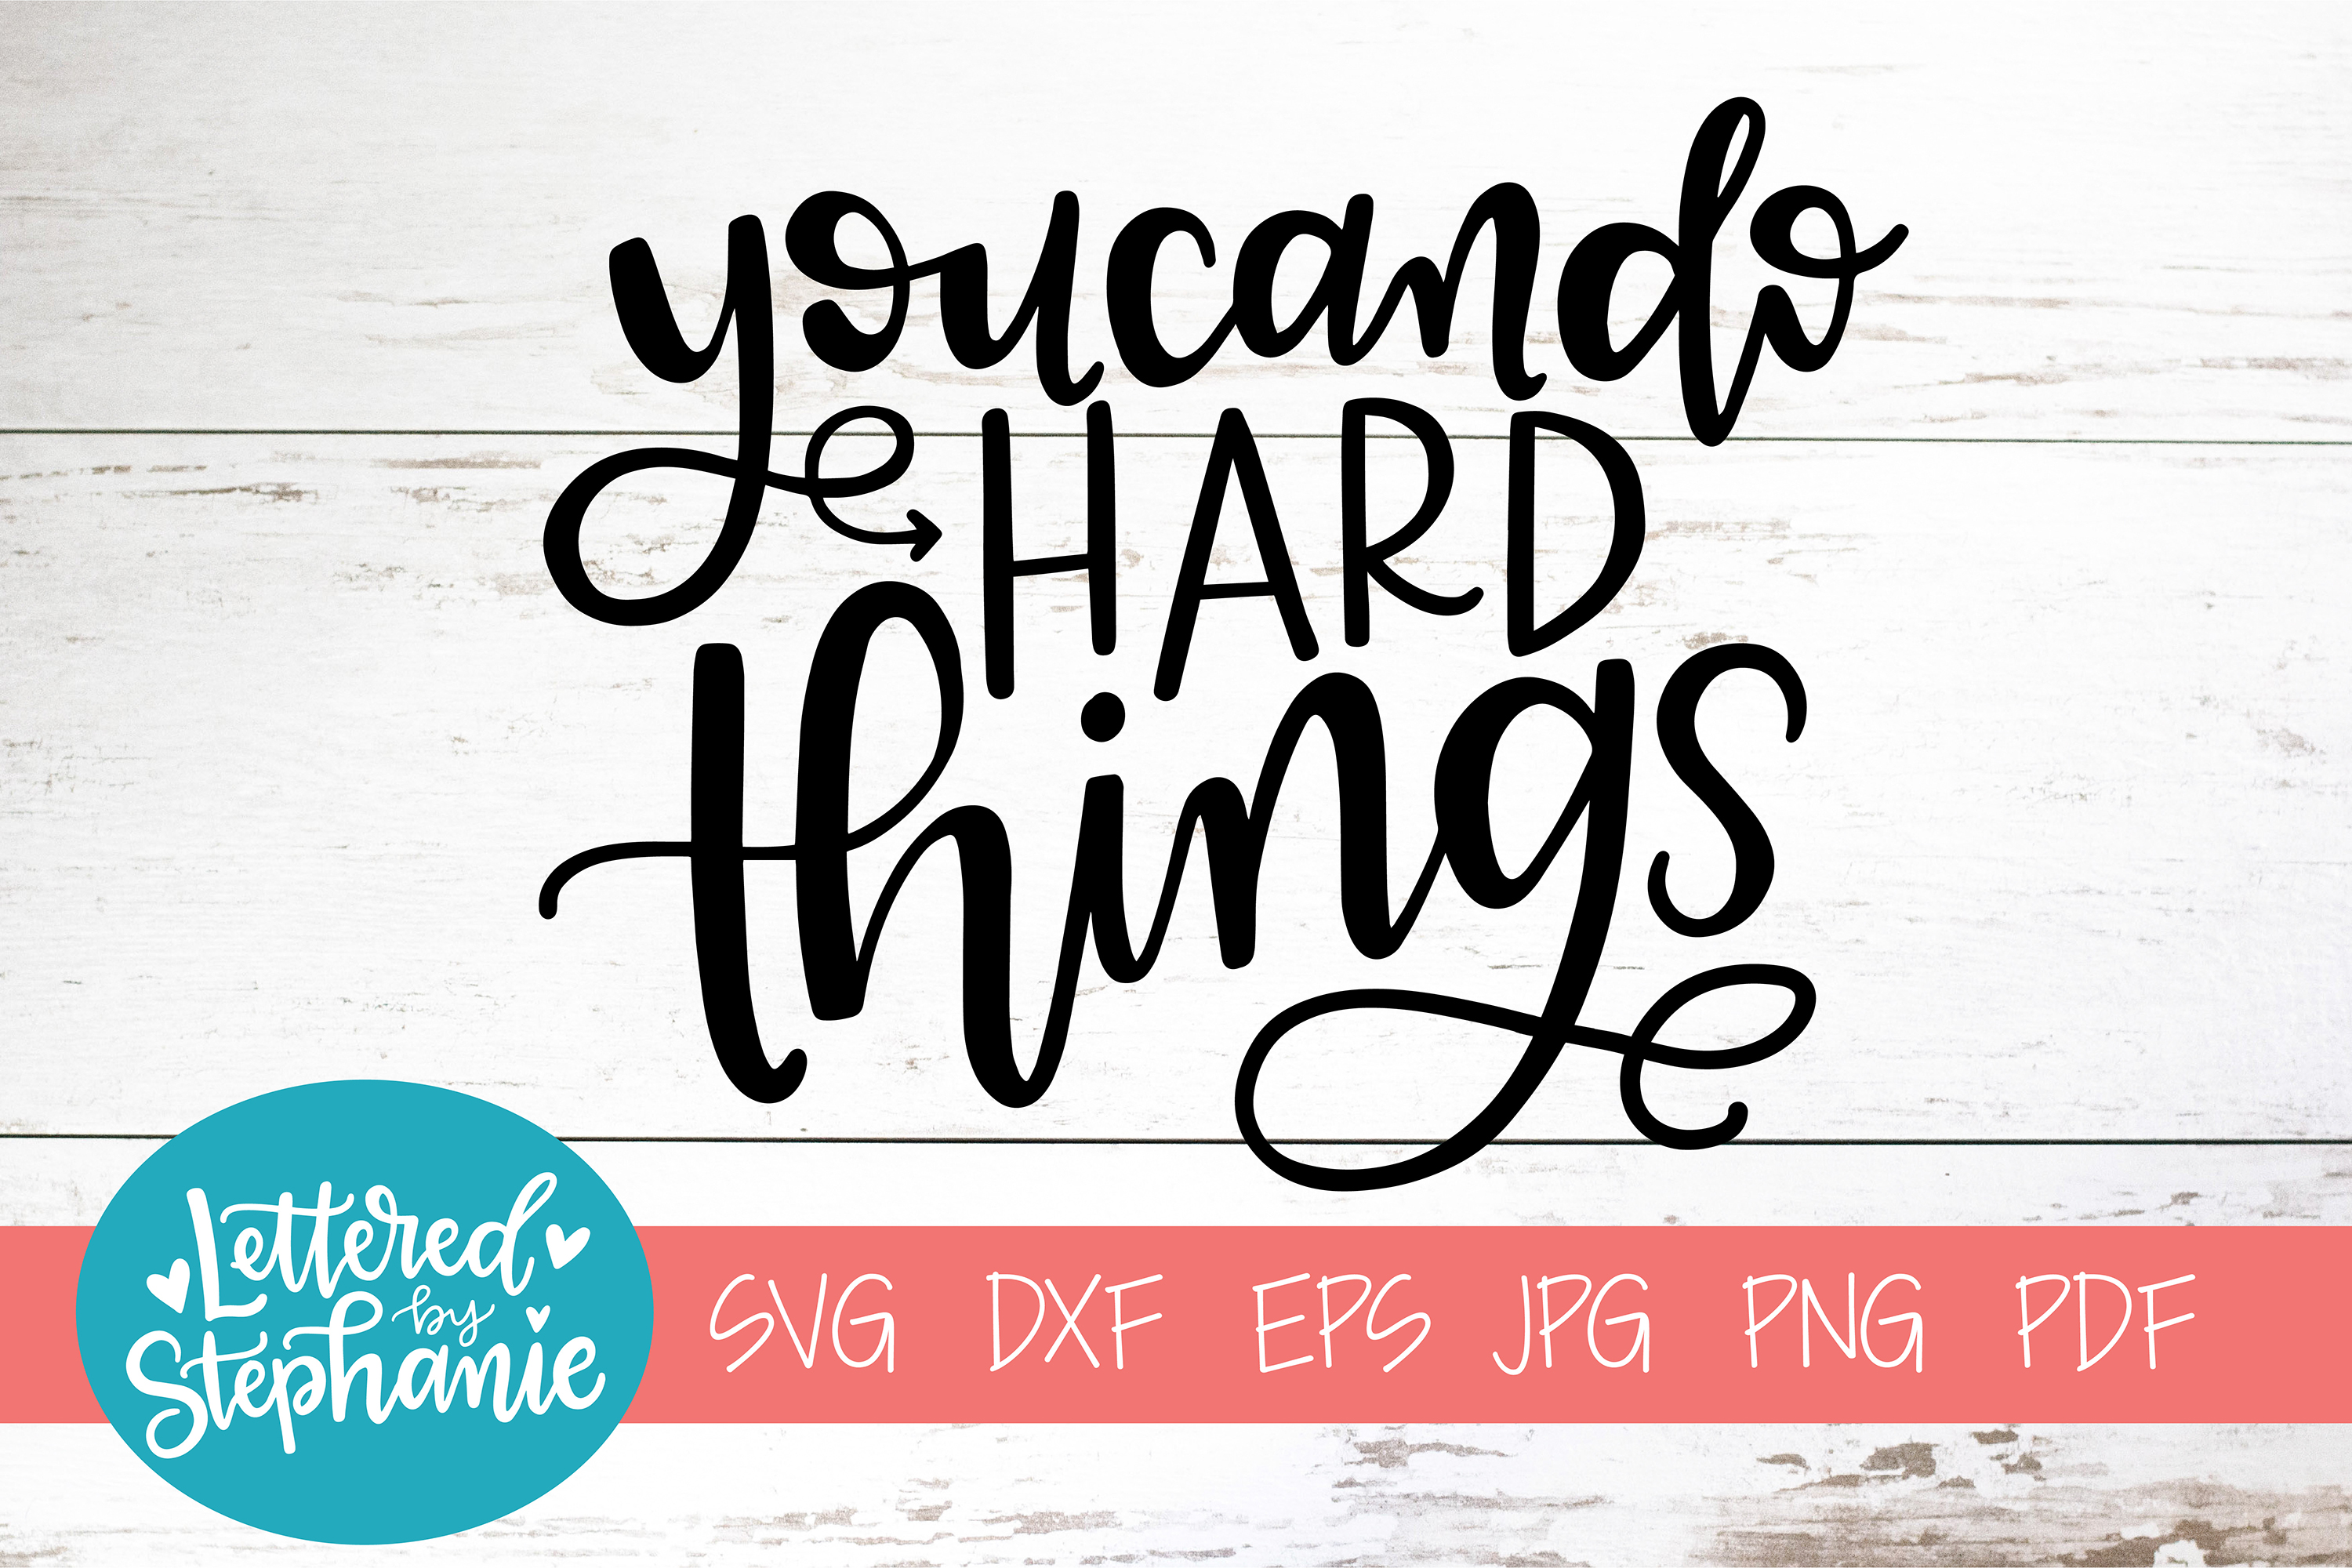 Download Handlettered SVG DXF, You can do hard things